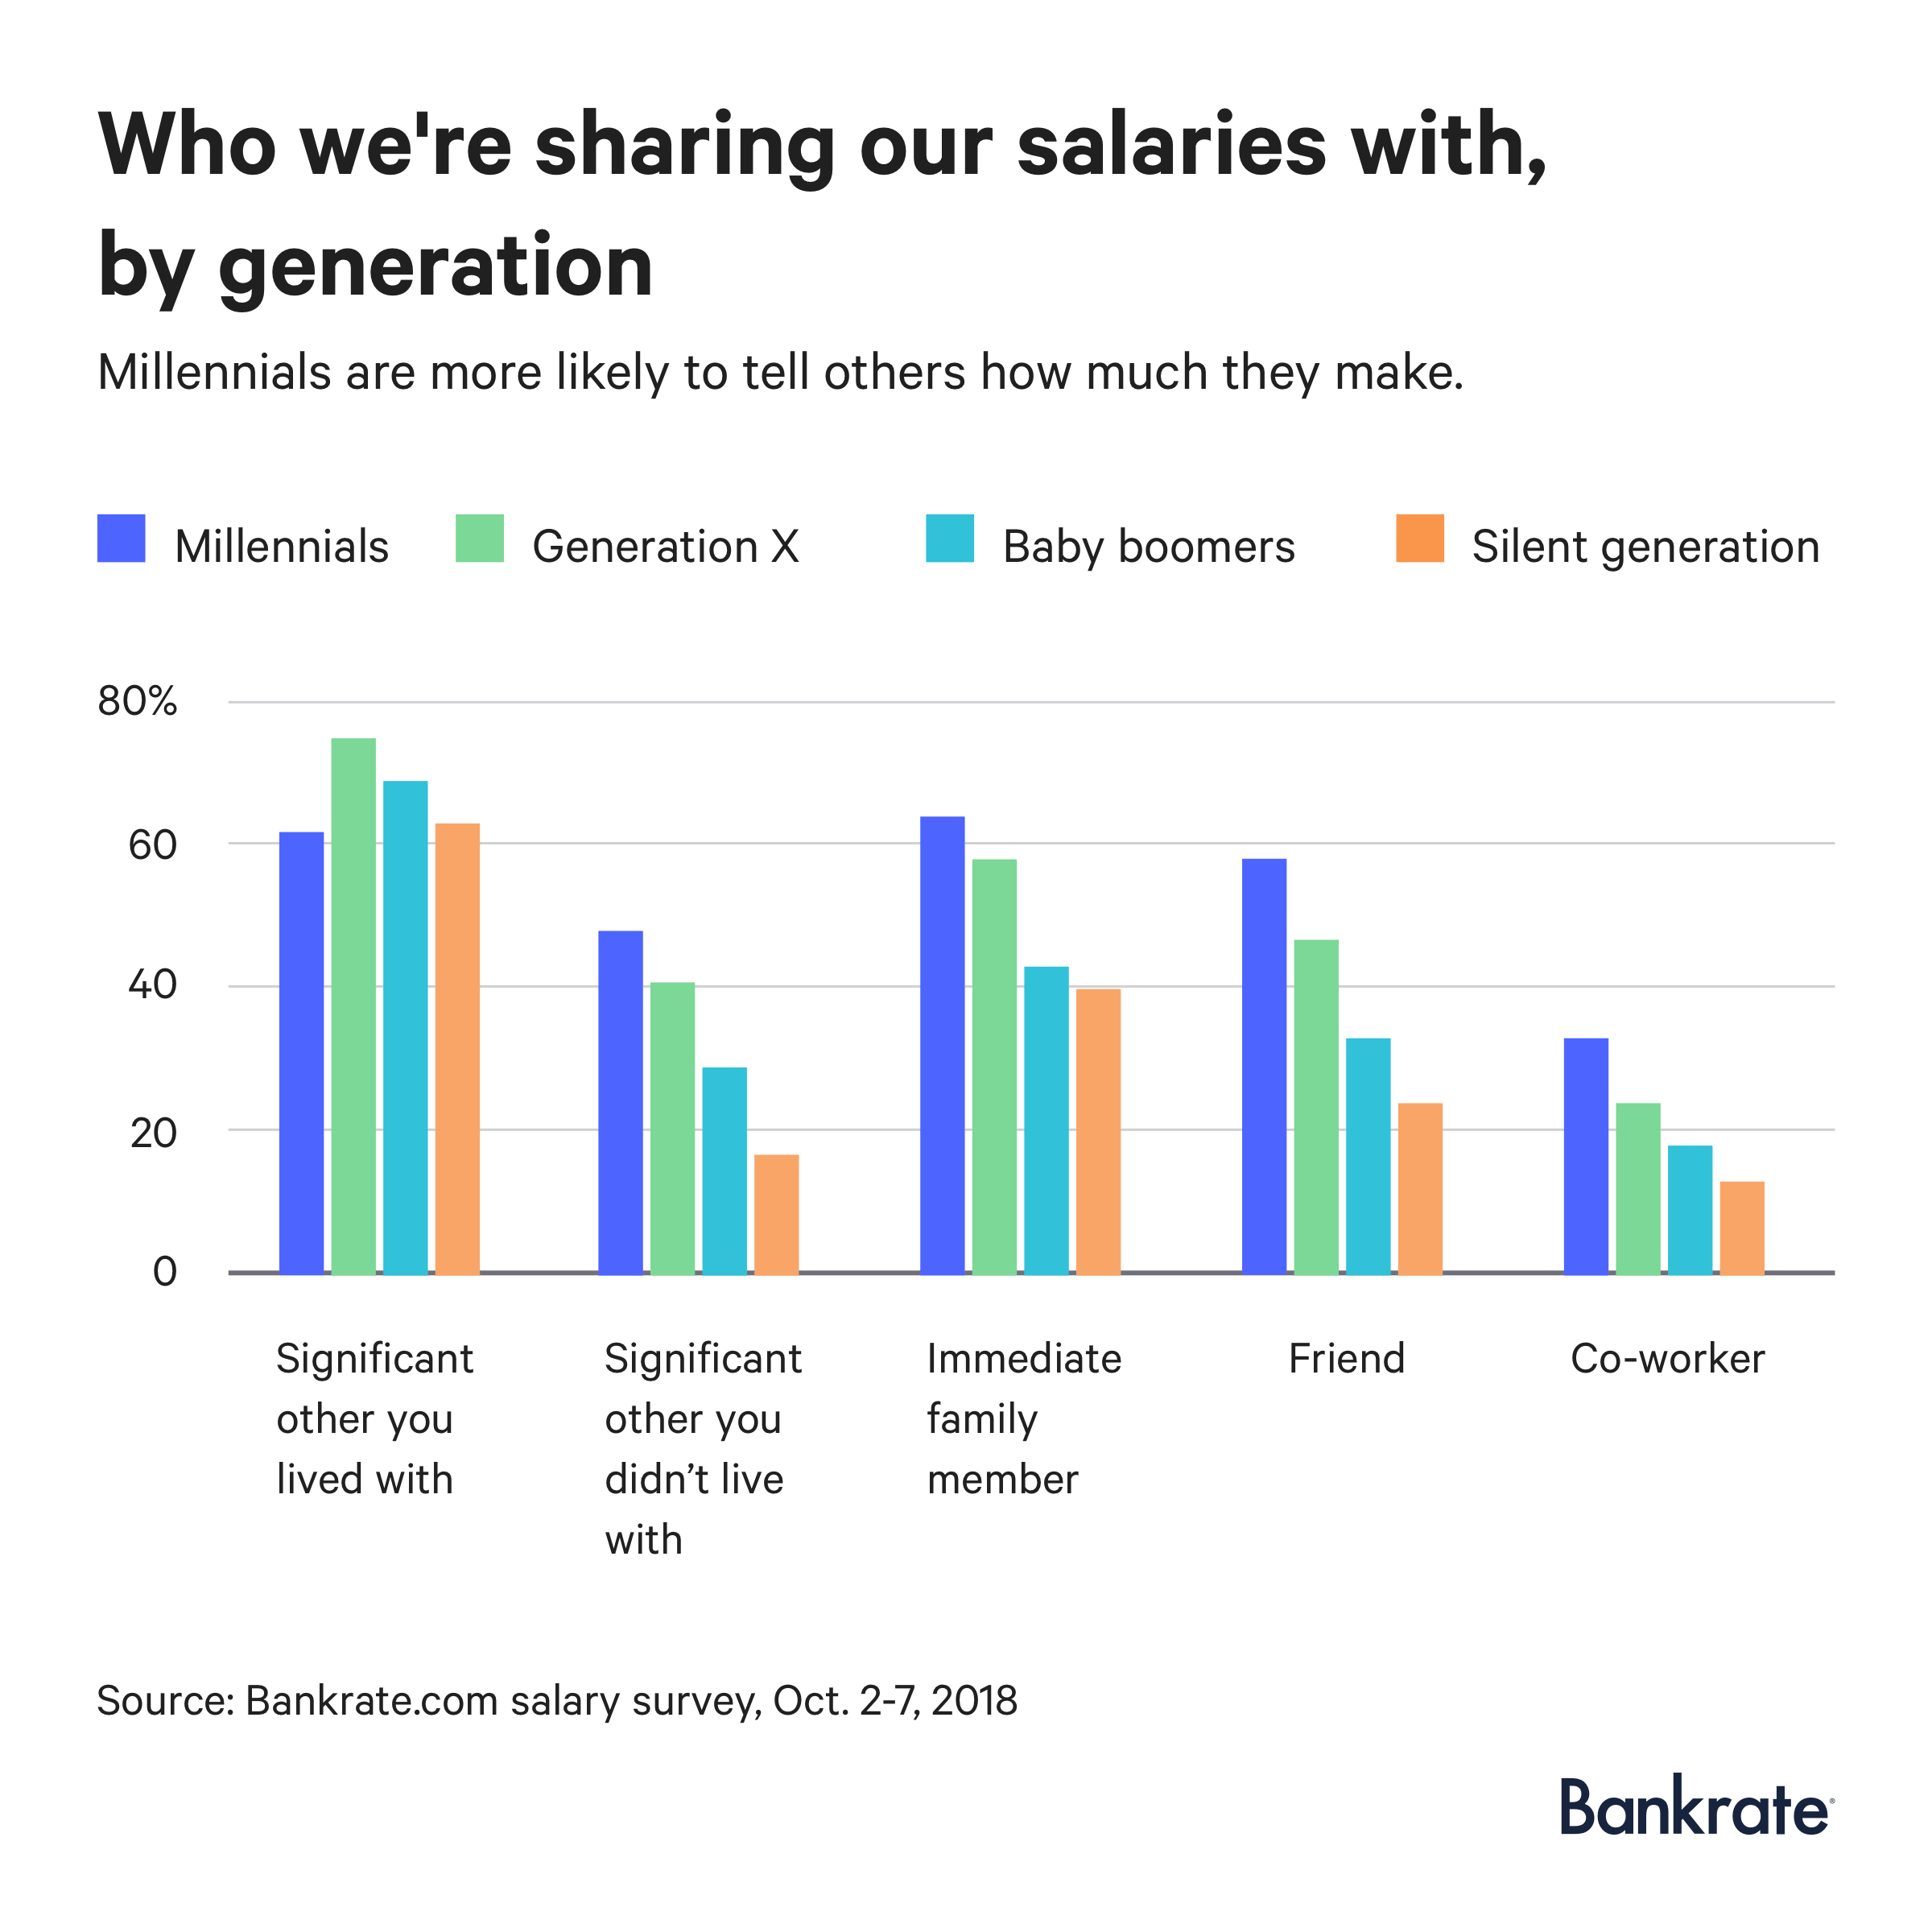 Millennials are more likely to tell others how much they make